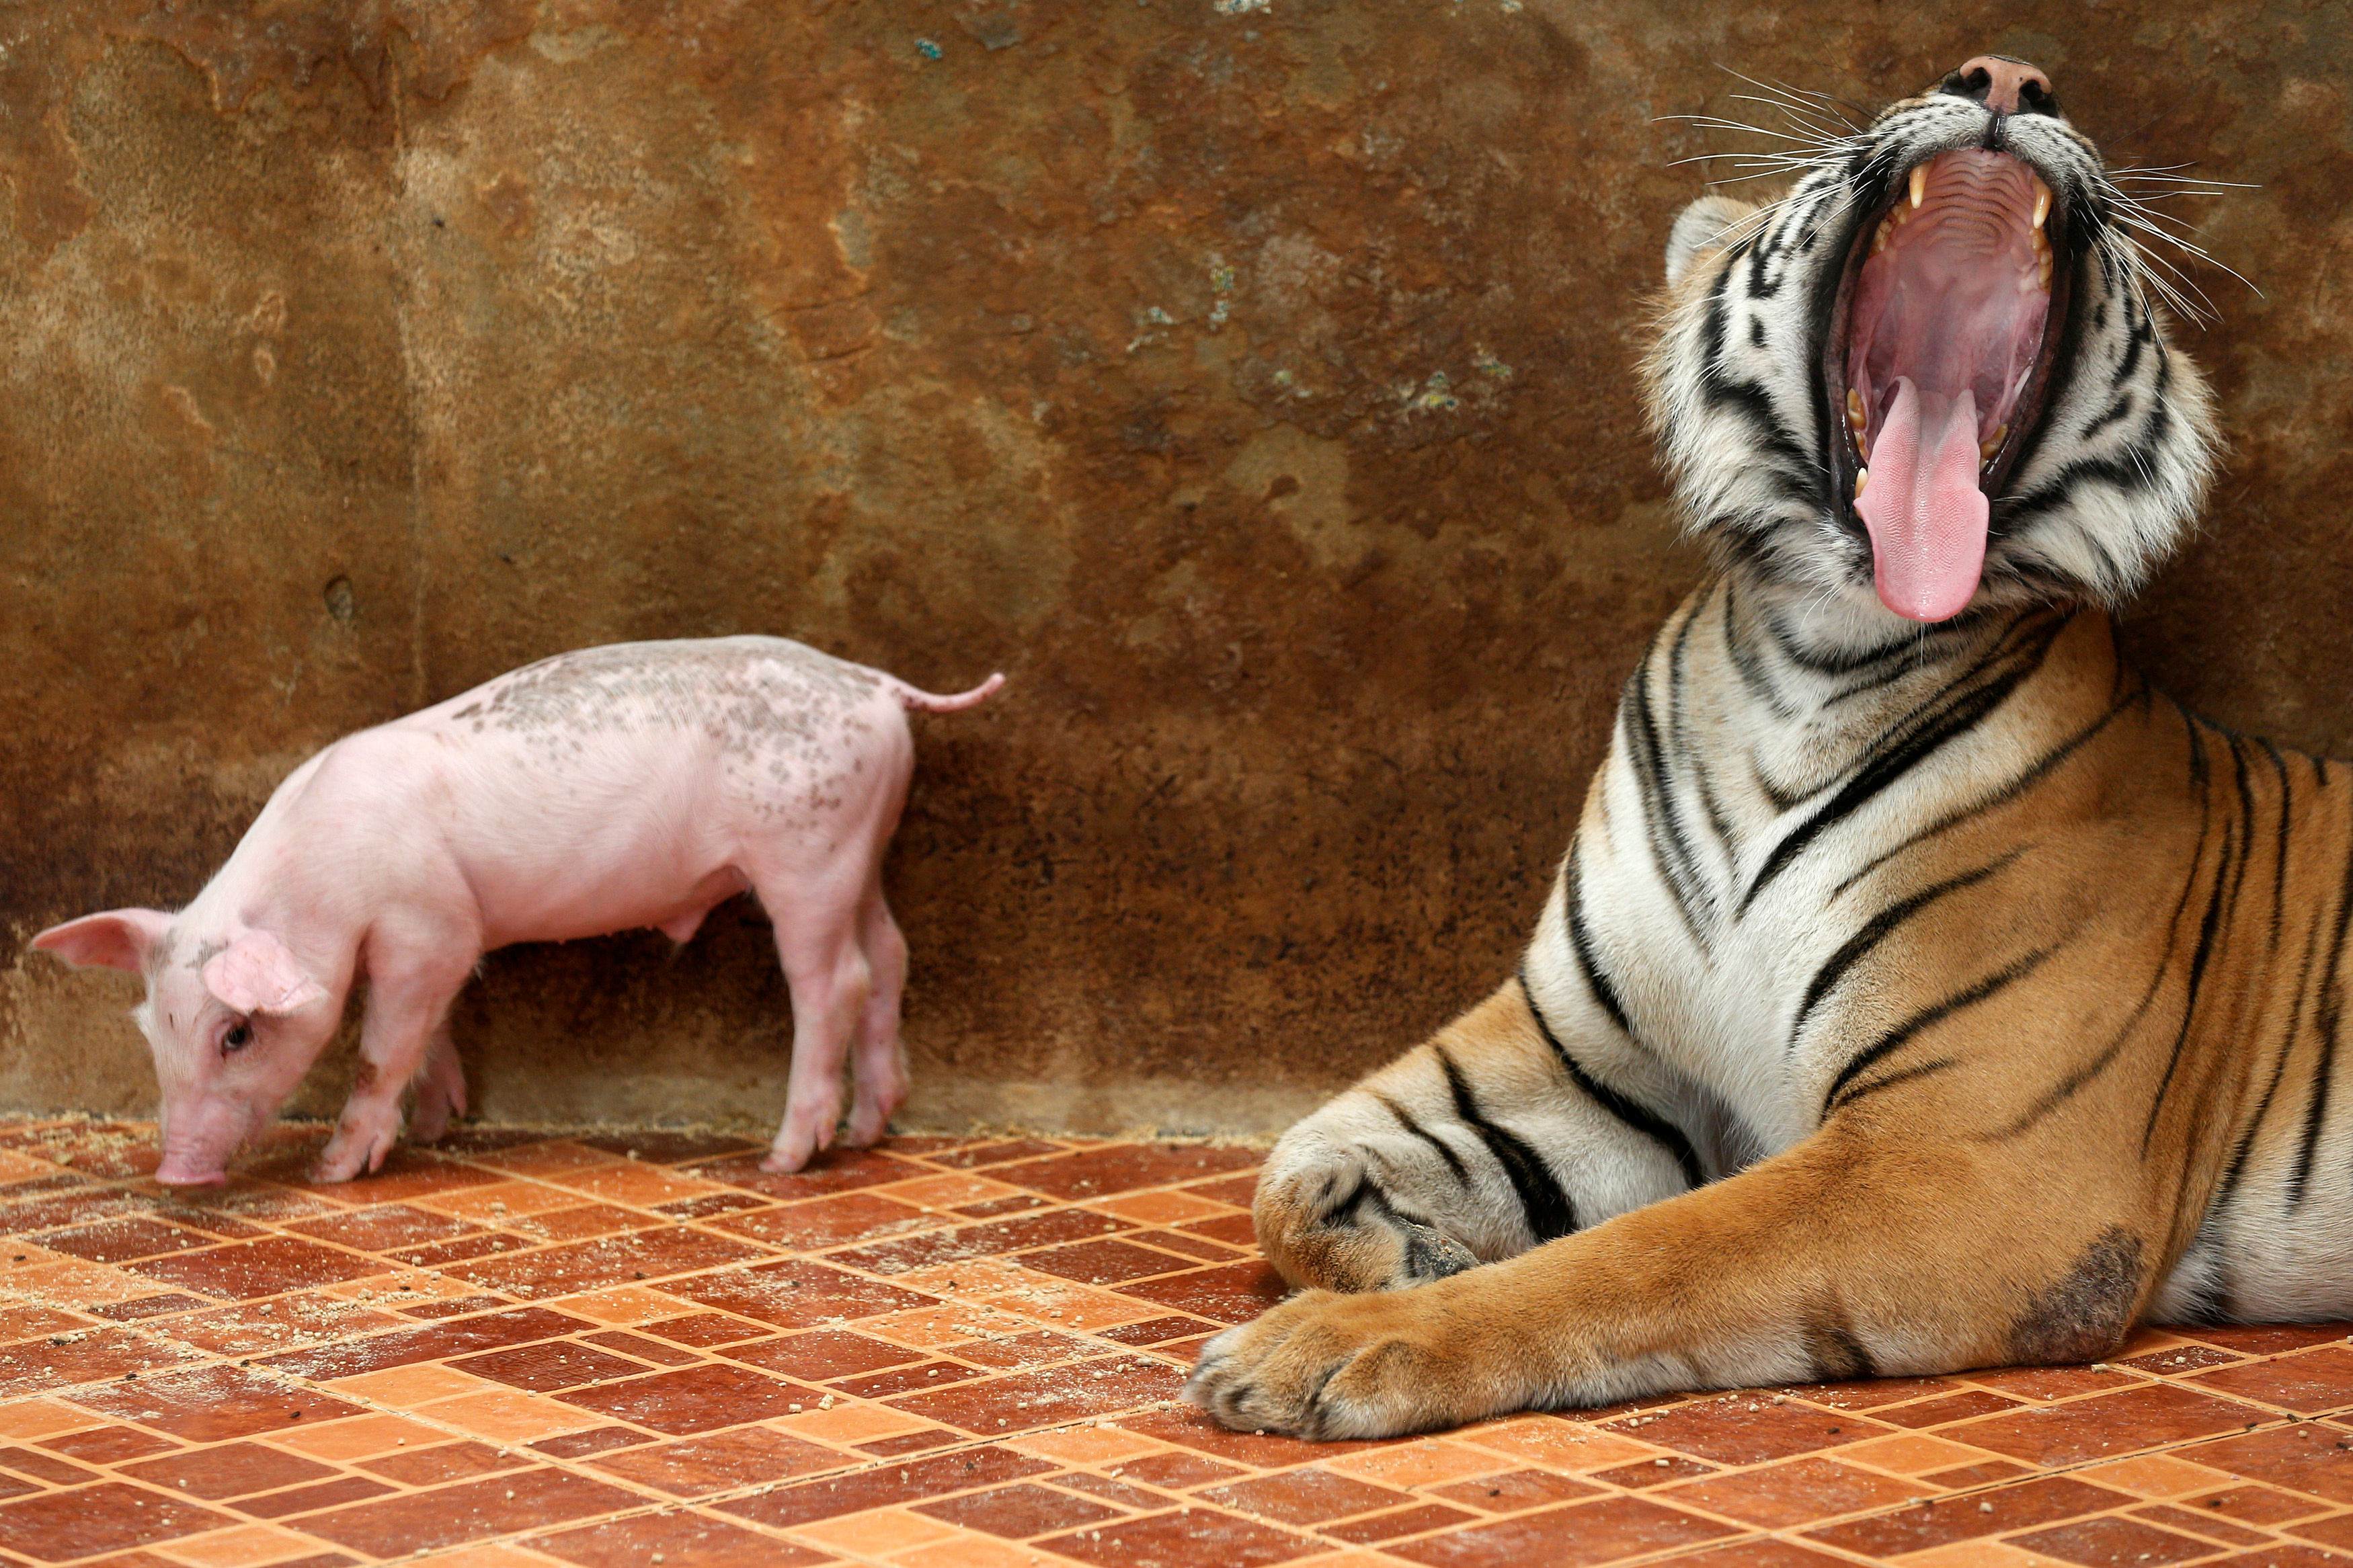 A tiger yawns next to a piglet at the Sriracha Tiger Zoo, in Chonburi province, Thailand, on June 7, 2016.